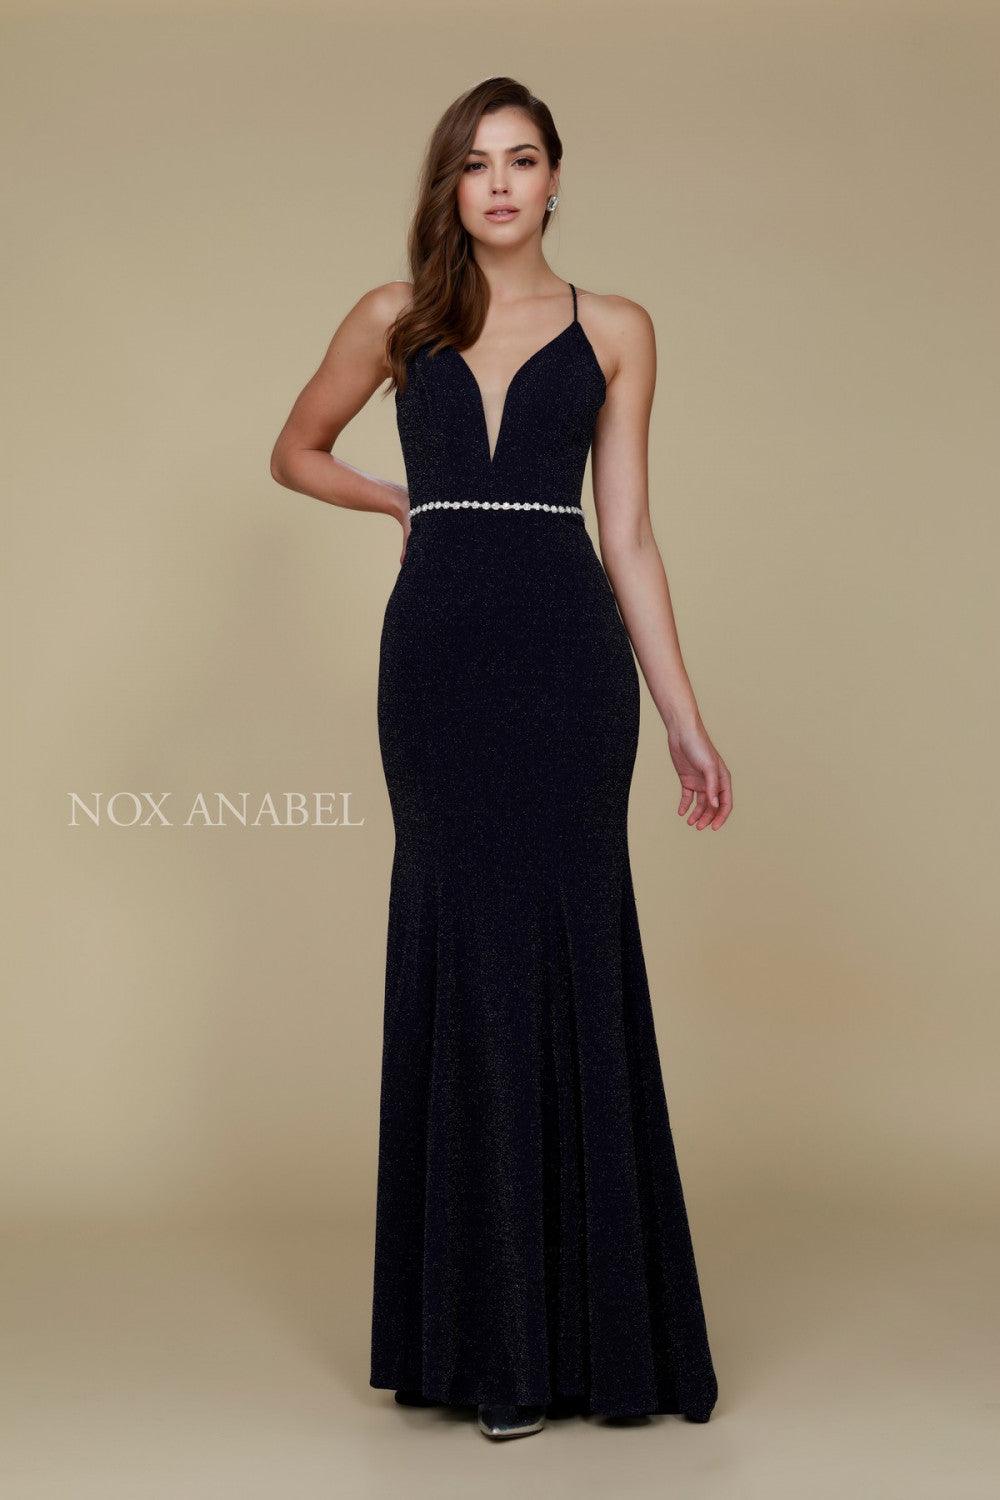 Long Open Back Prom Dress Formal Evening Gown - The Dress Outlet Nox Anabel